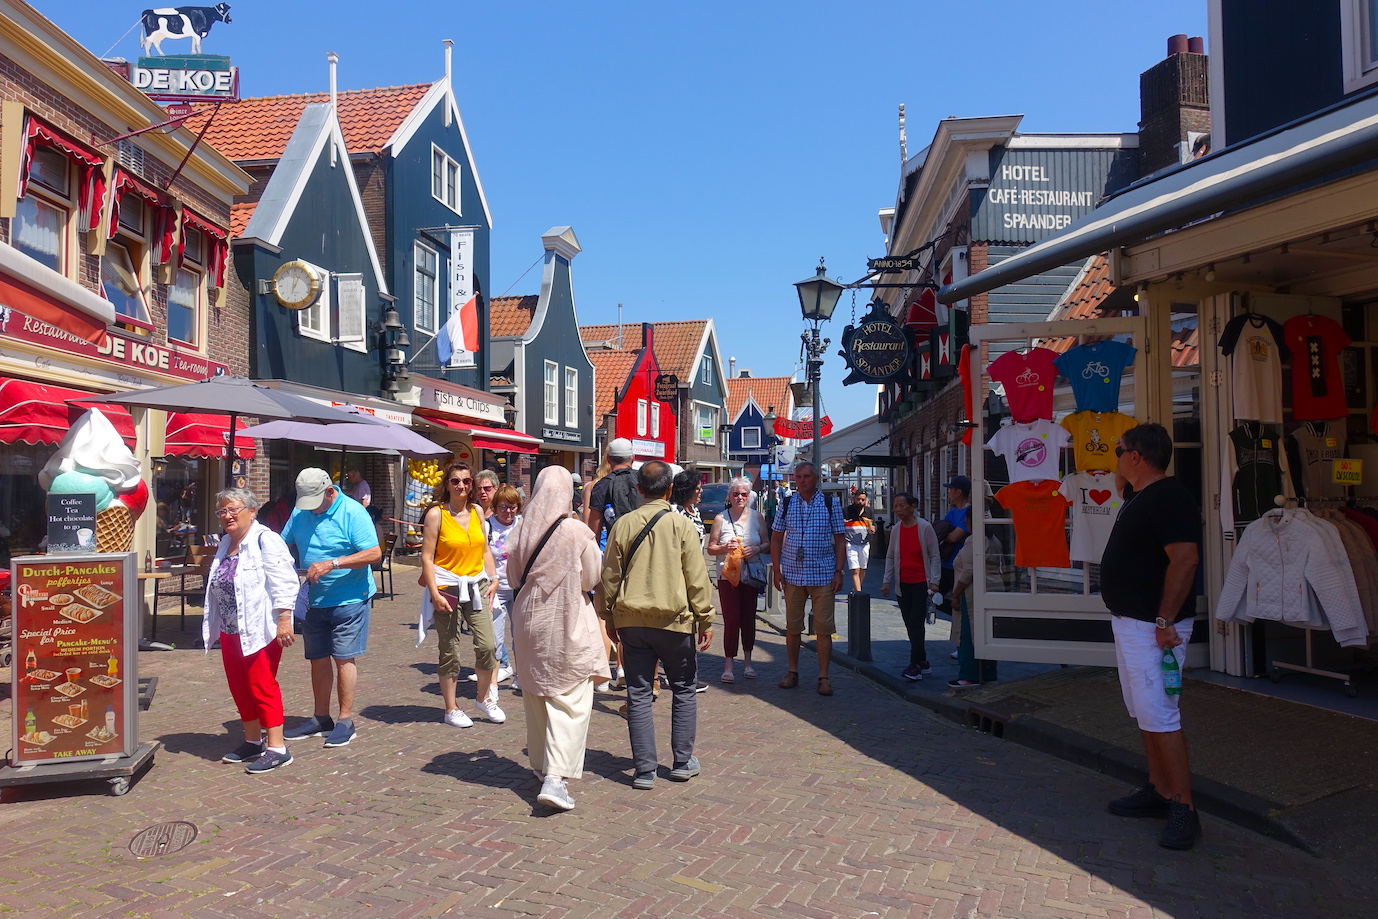 People walking on the streets of Volendam where the souvenirs are